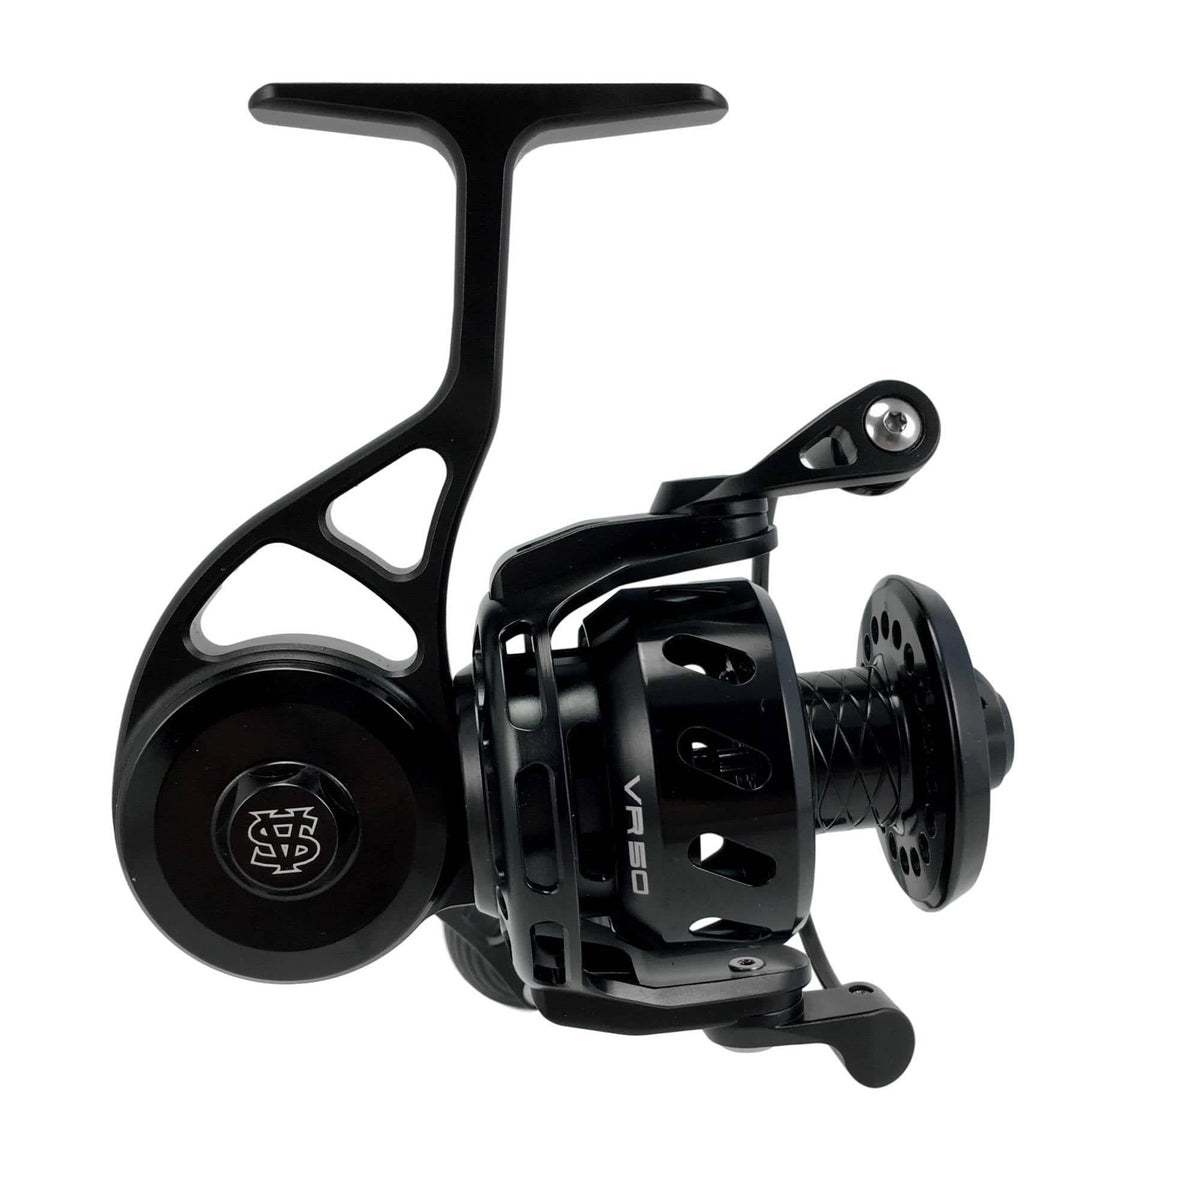 What 8 foot rod should I get for a van staal vr50 or vr75? : r/SurfFishing